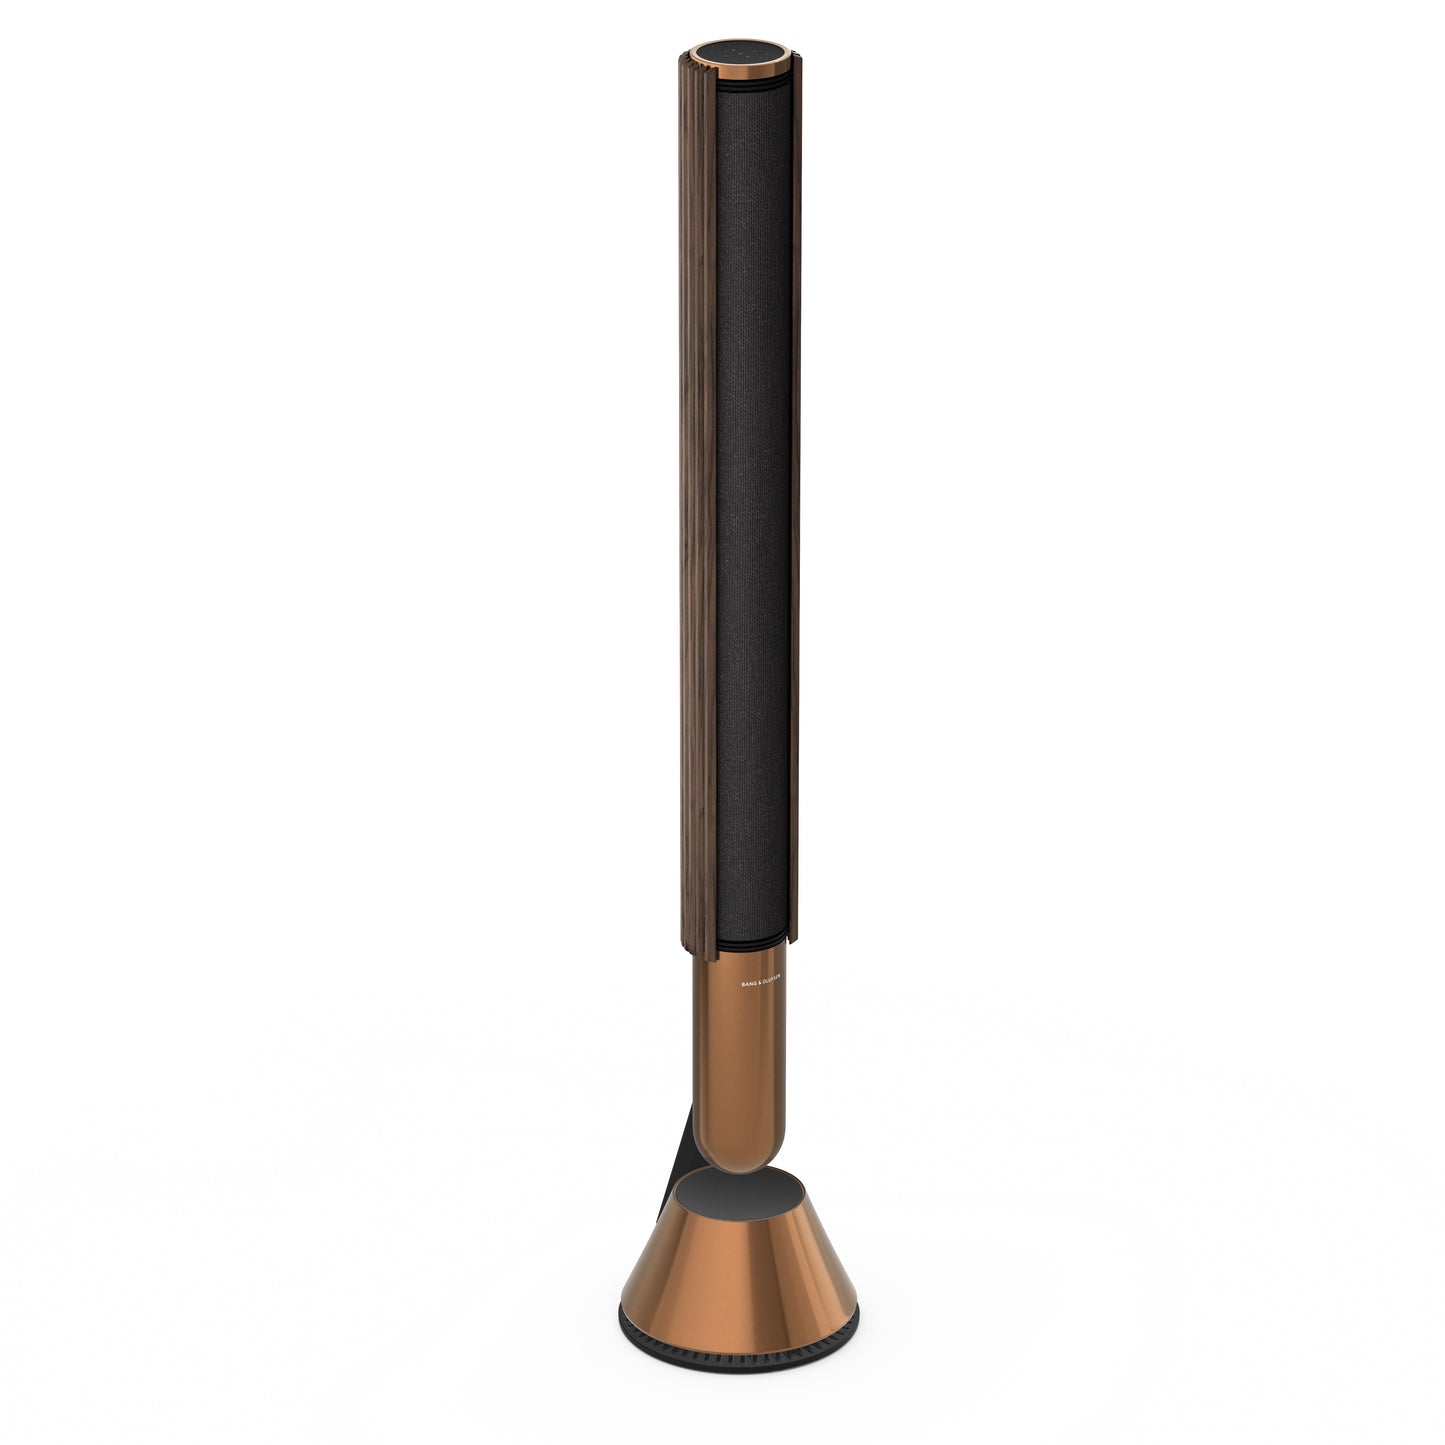 BeoLab 28 in Bronze Tone mit Cover in Walnussholz